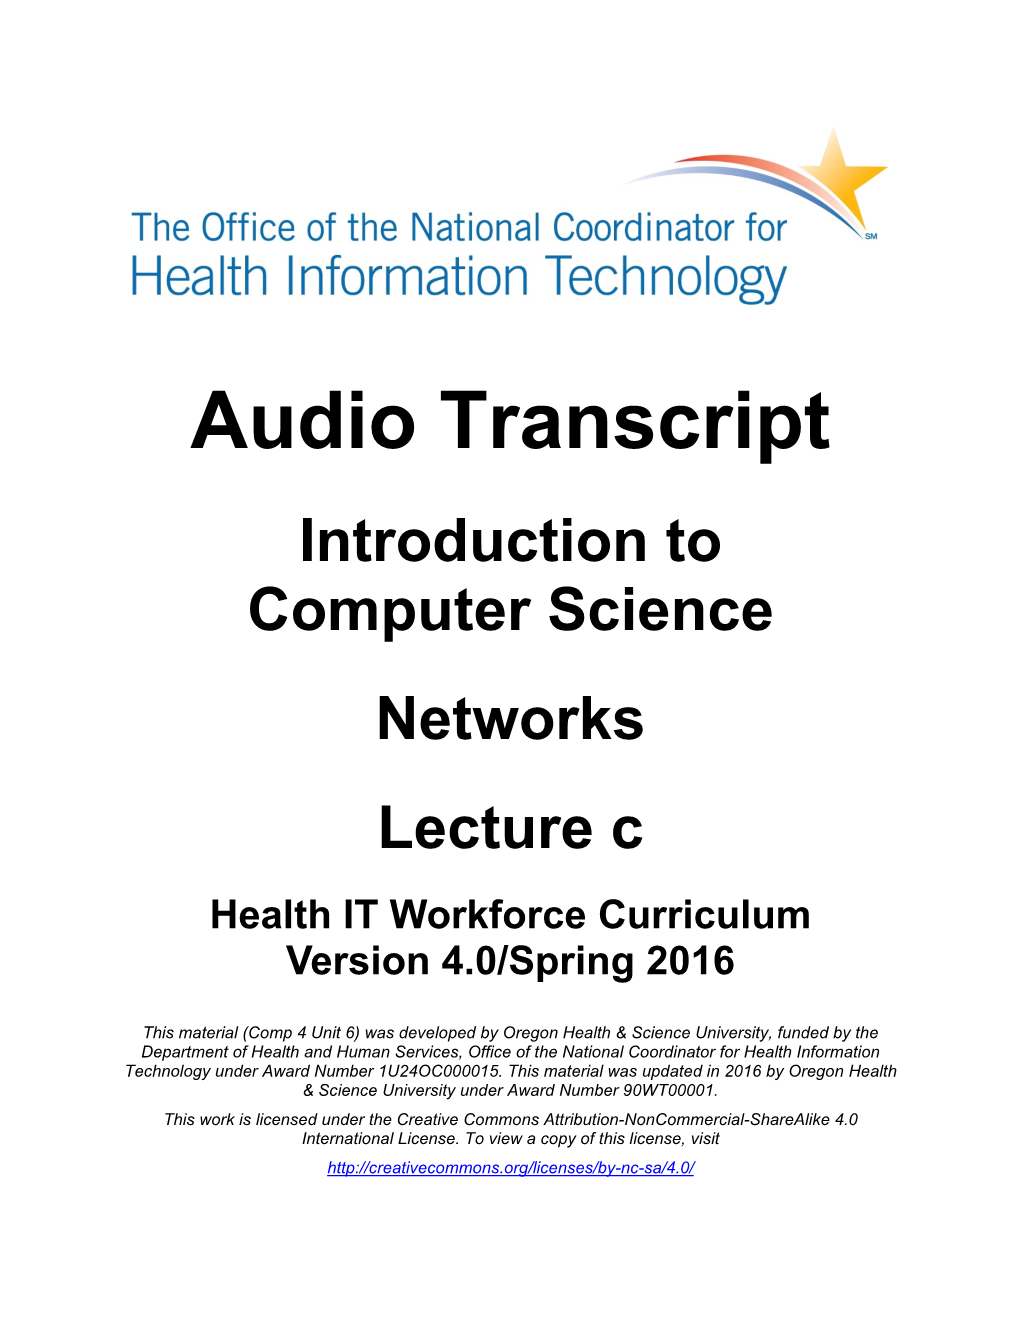 Introduction to Computer Science Networks Lecture C Health IT Workforce Curriculum Version 4.0/Spring 2016